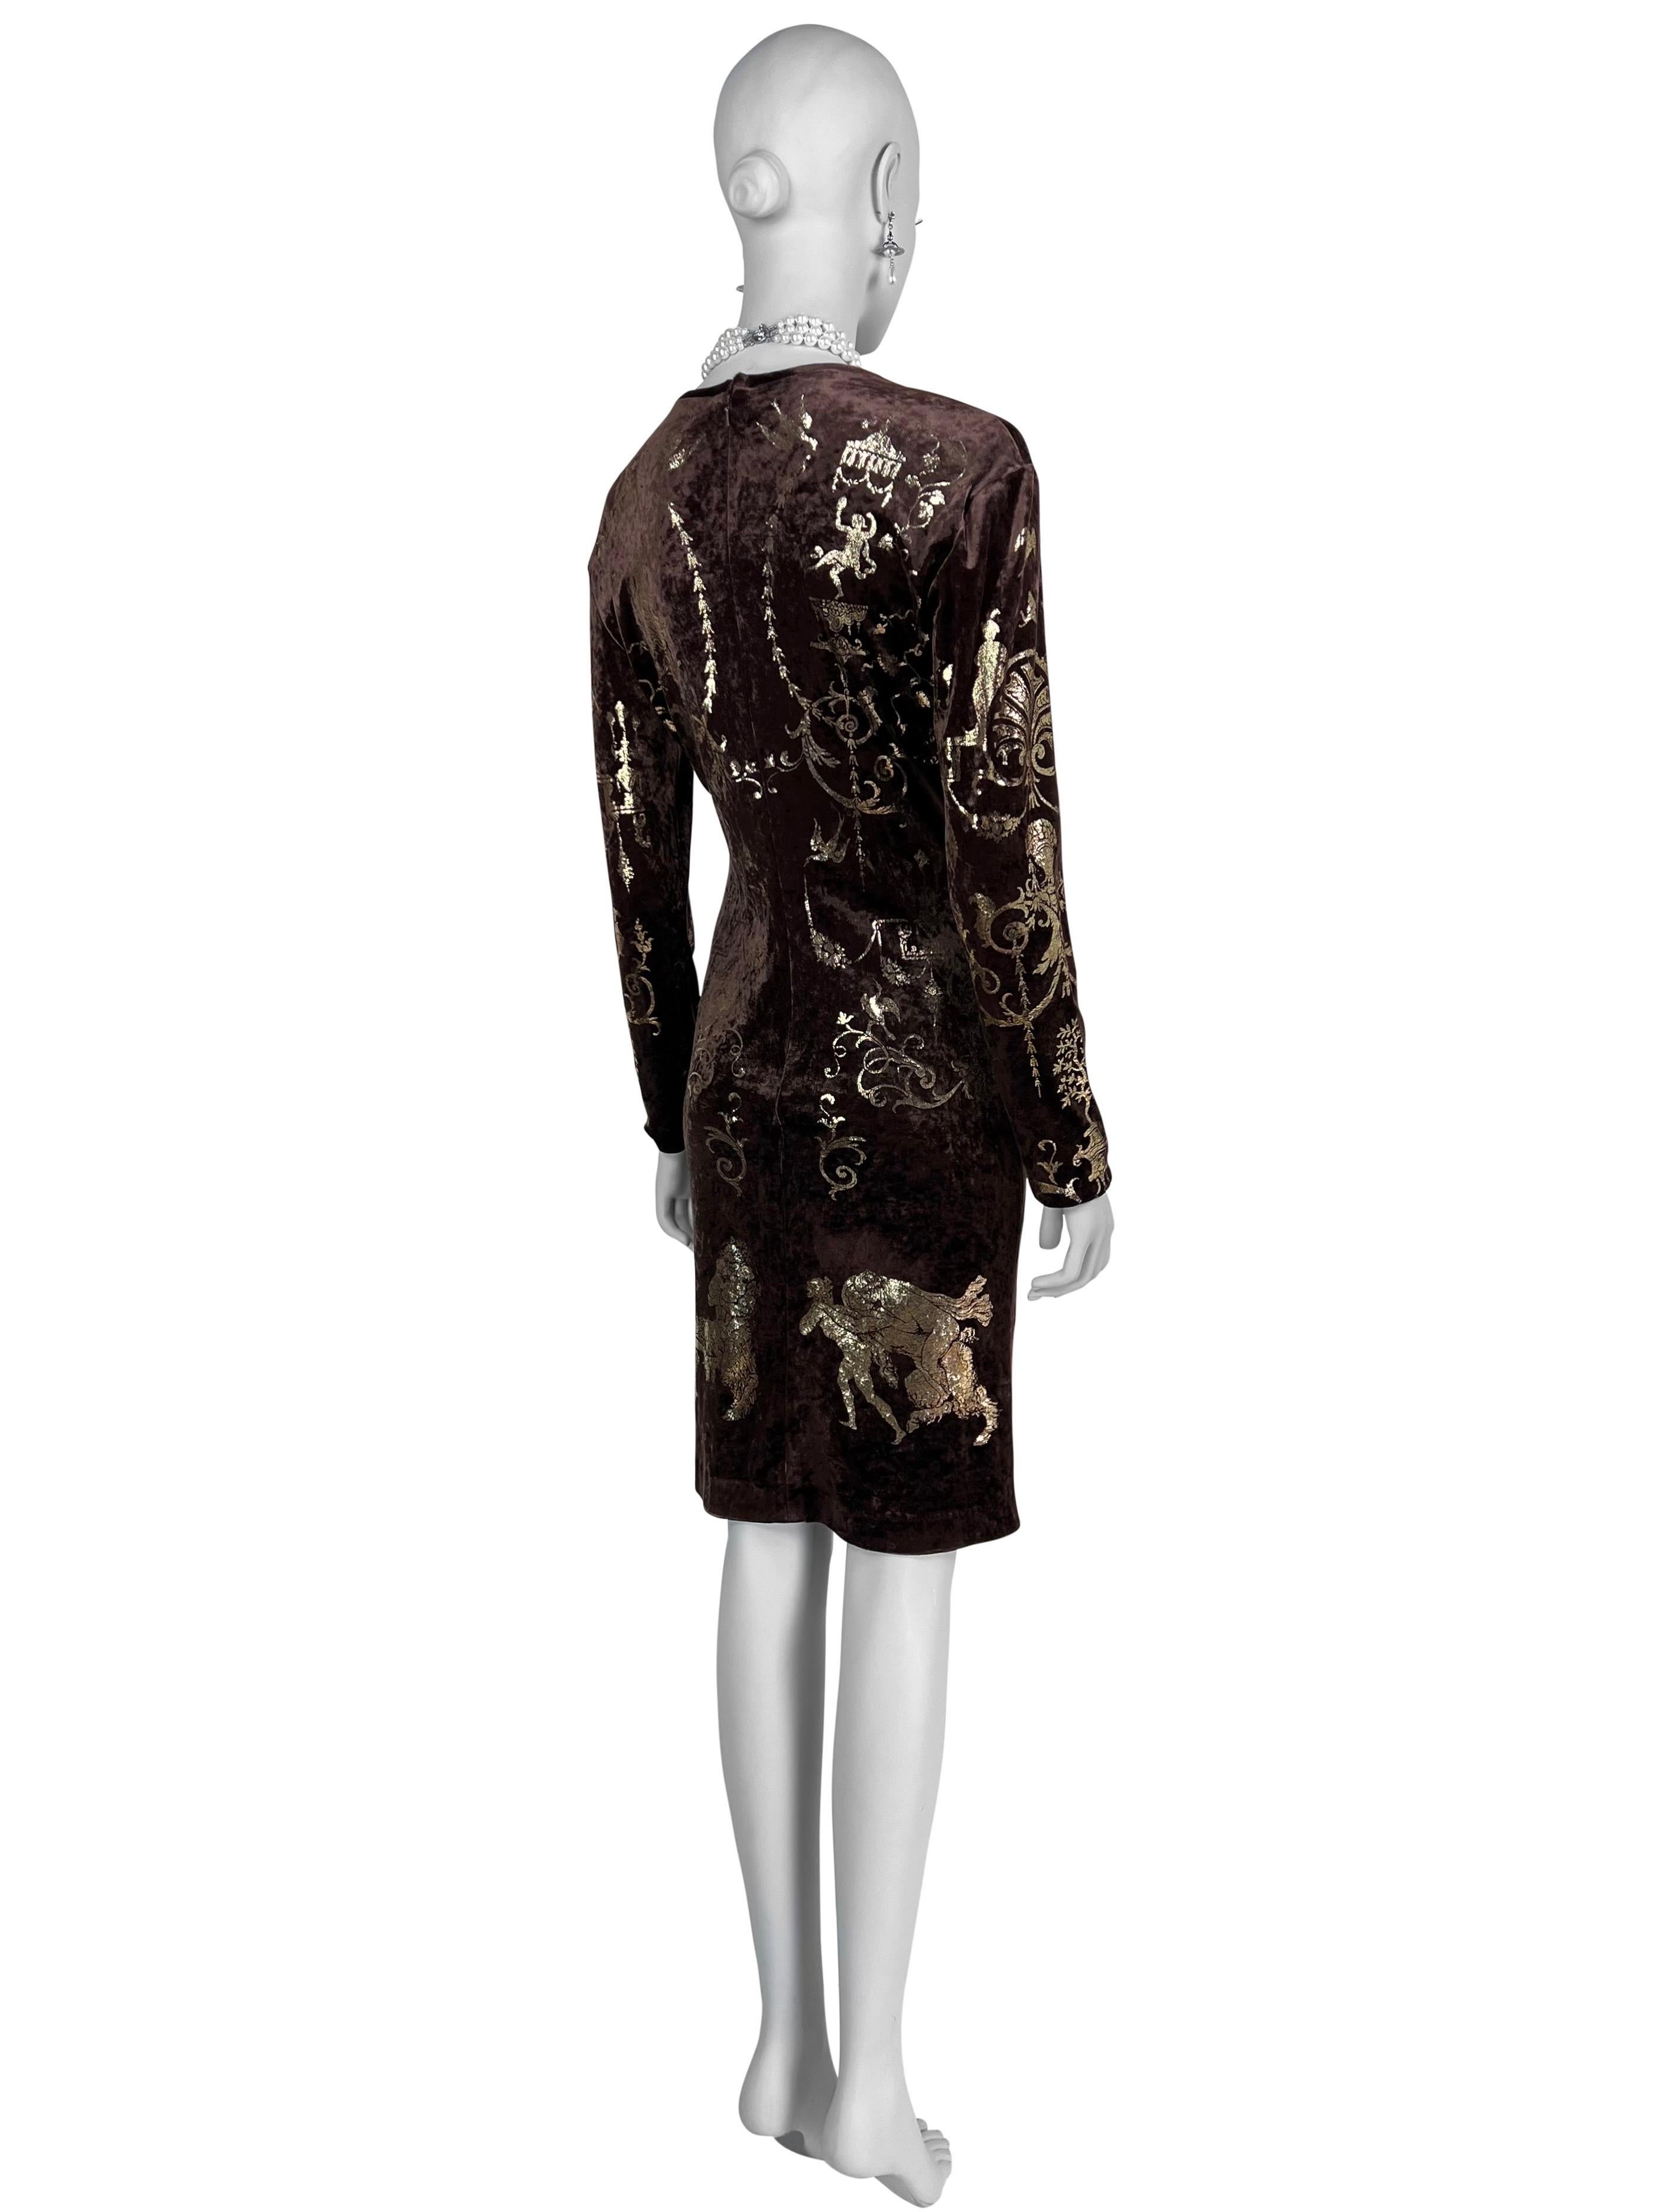 Vivienne Westwood Fall 1990 “Portrait Collection” Foiled “Boulle” Printed Velvet For Sale 9